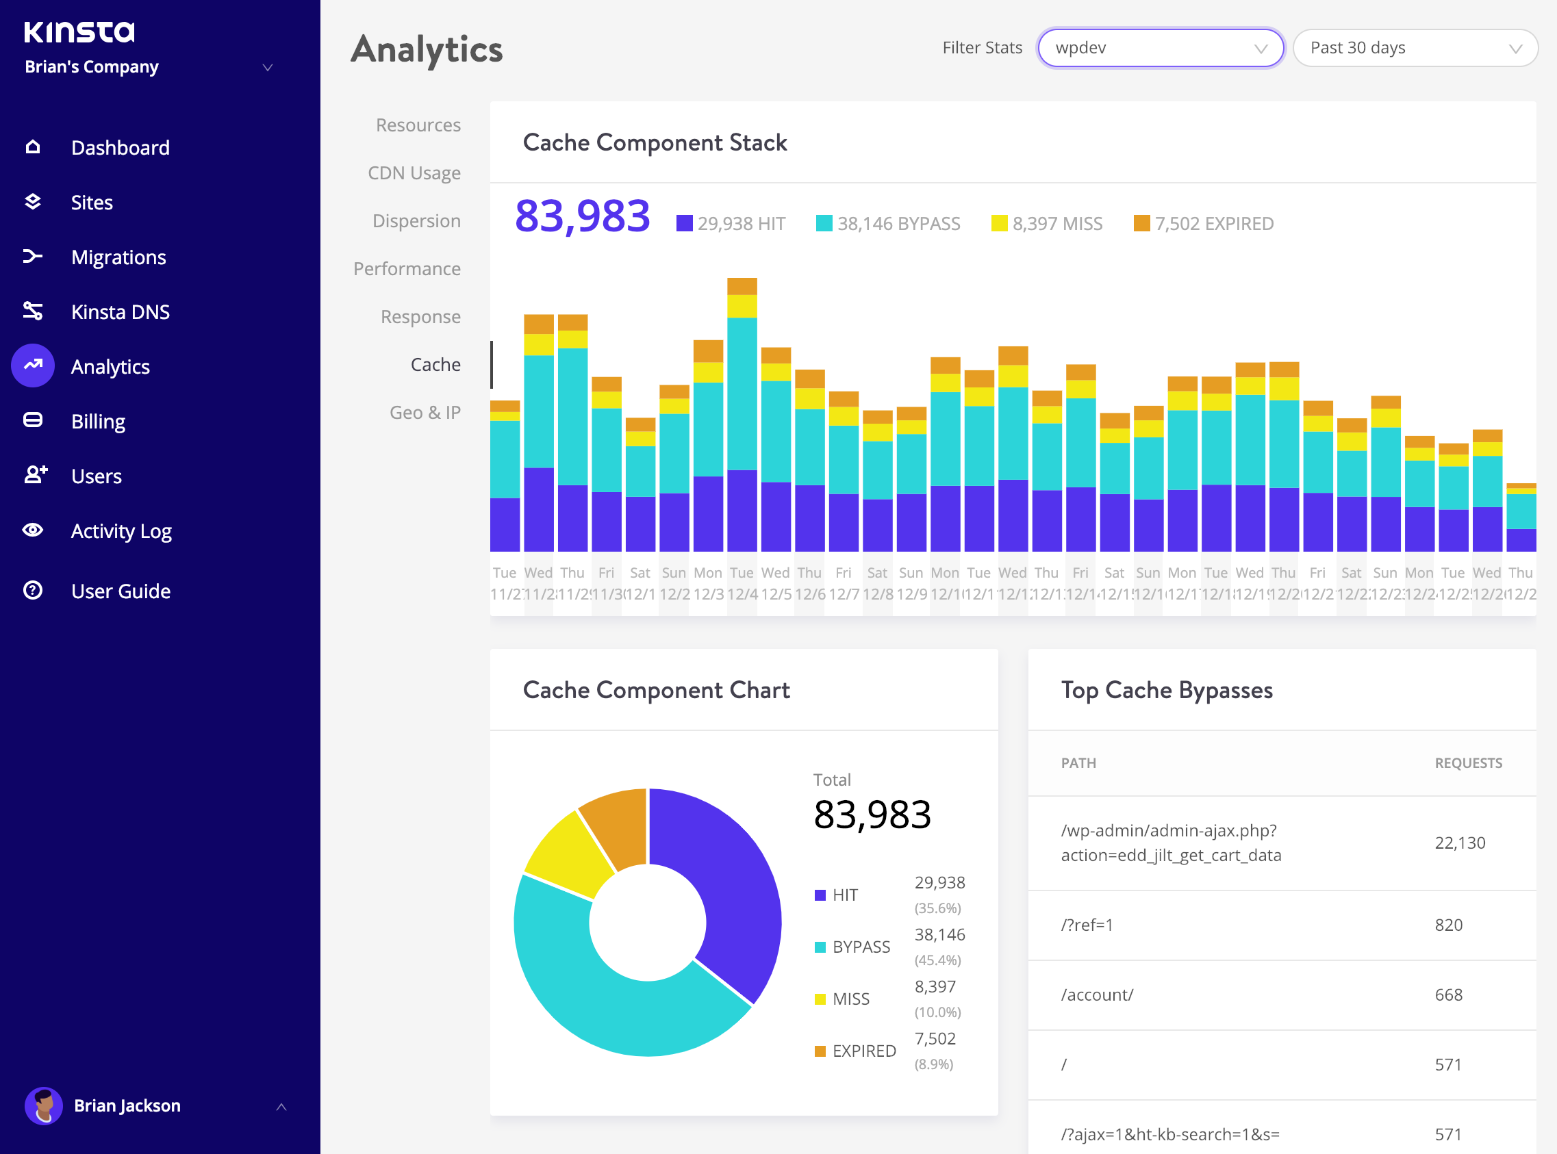 The MyKinsta Analytics tool provides invaluable data about the performance of your site.